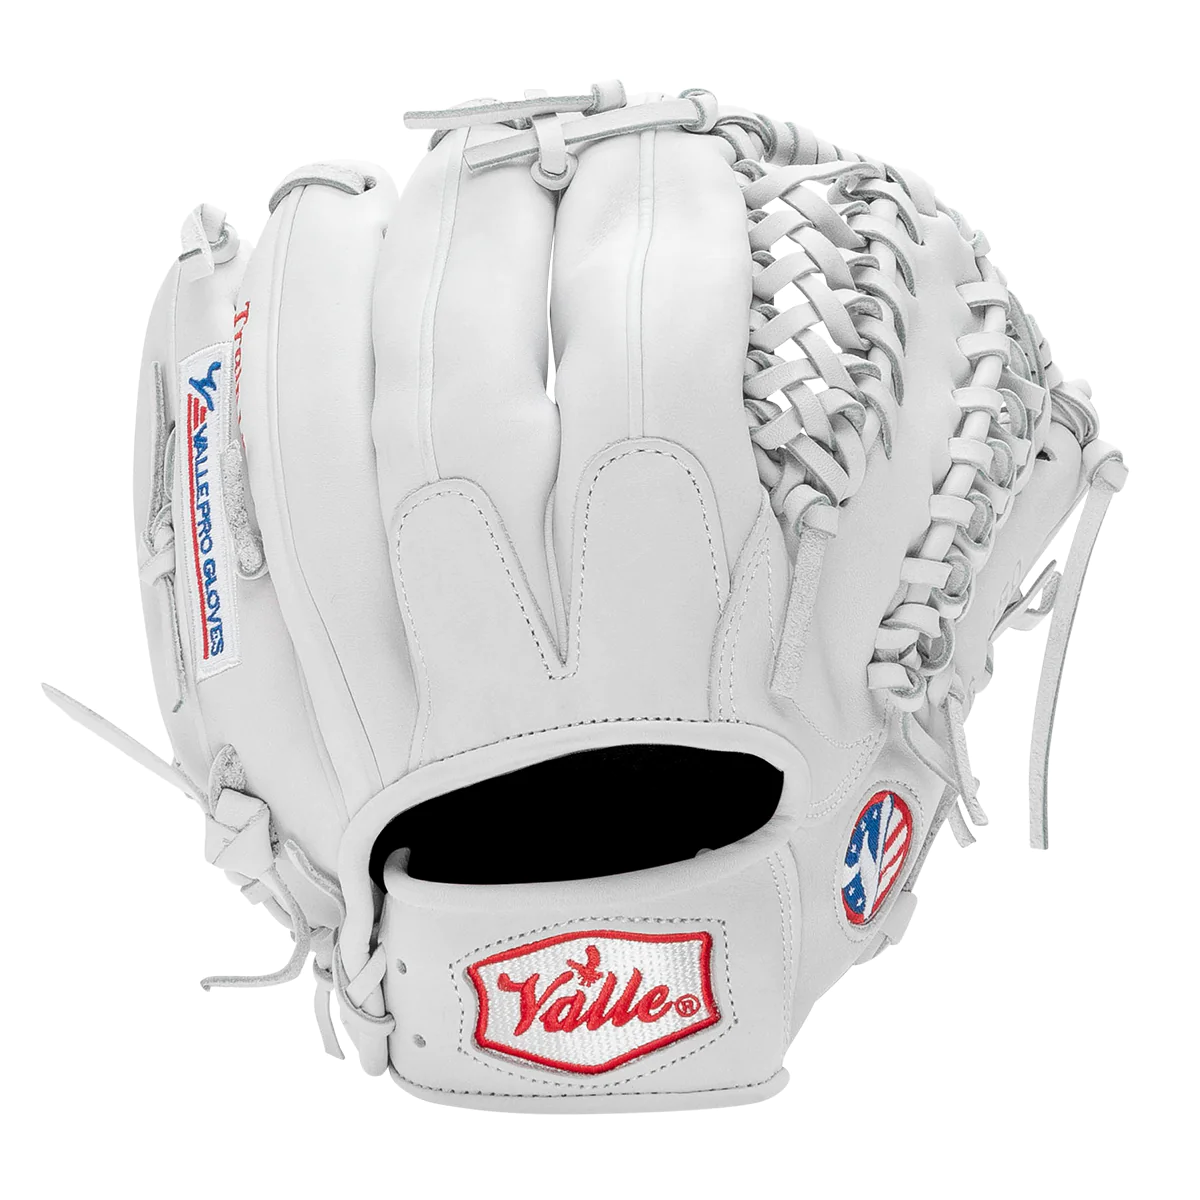 EAGLE 1050S OUTFIELD TRAINING GLOVE